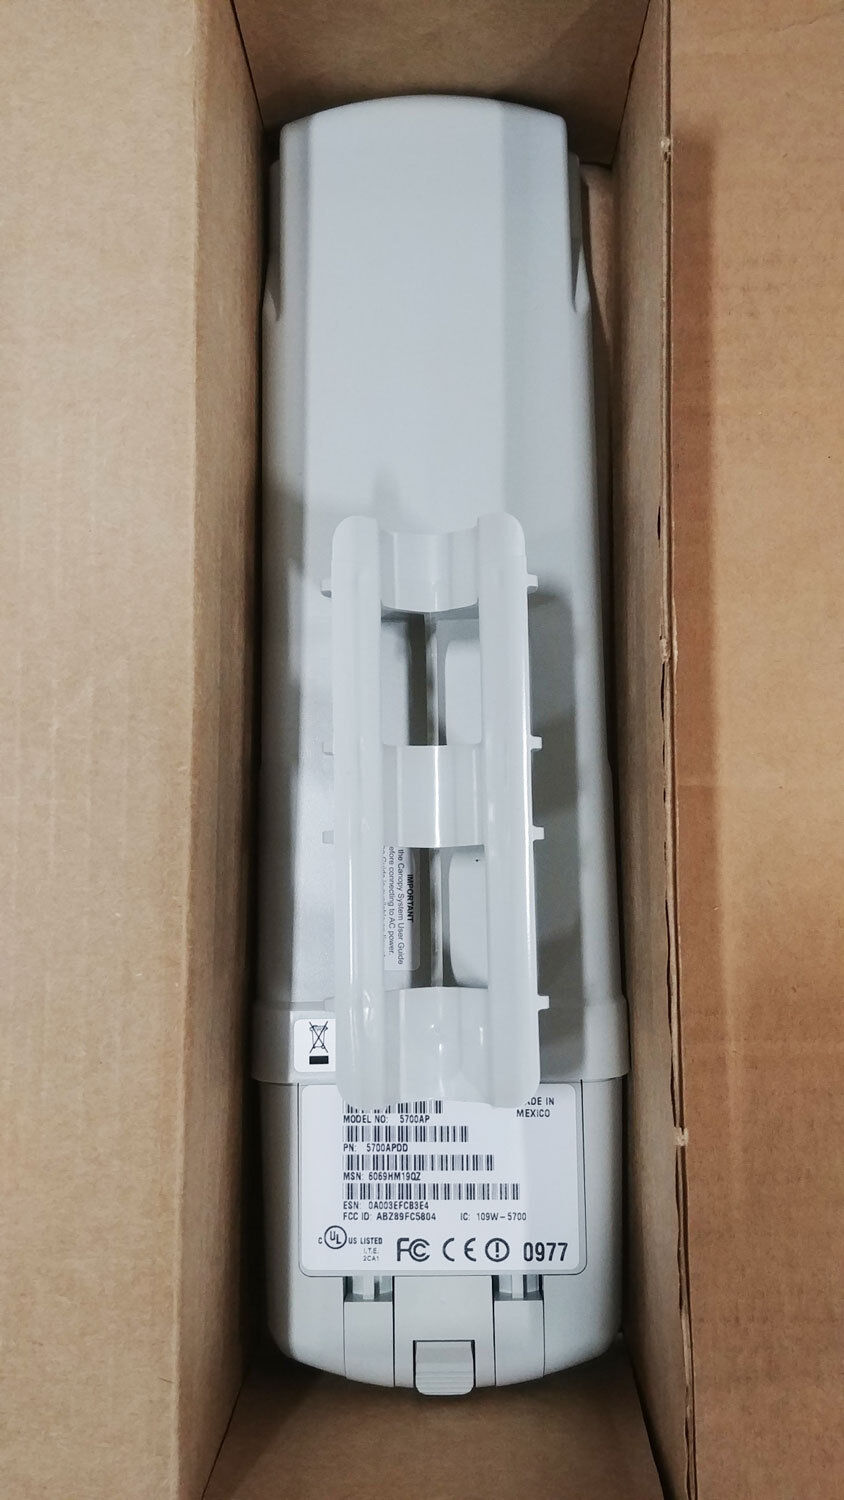 Cambium / Motorola Canopy New 5700AP 5.7GHz Access Point with Integrated Antenna